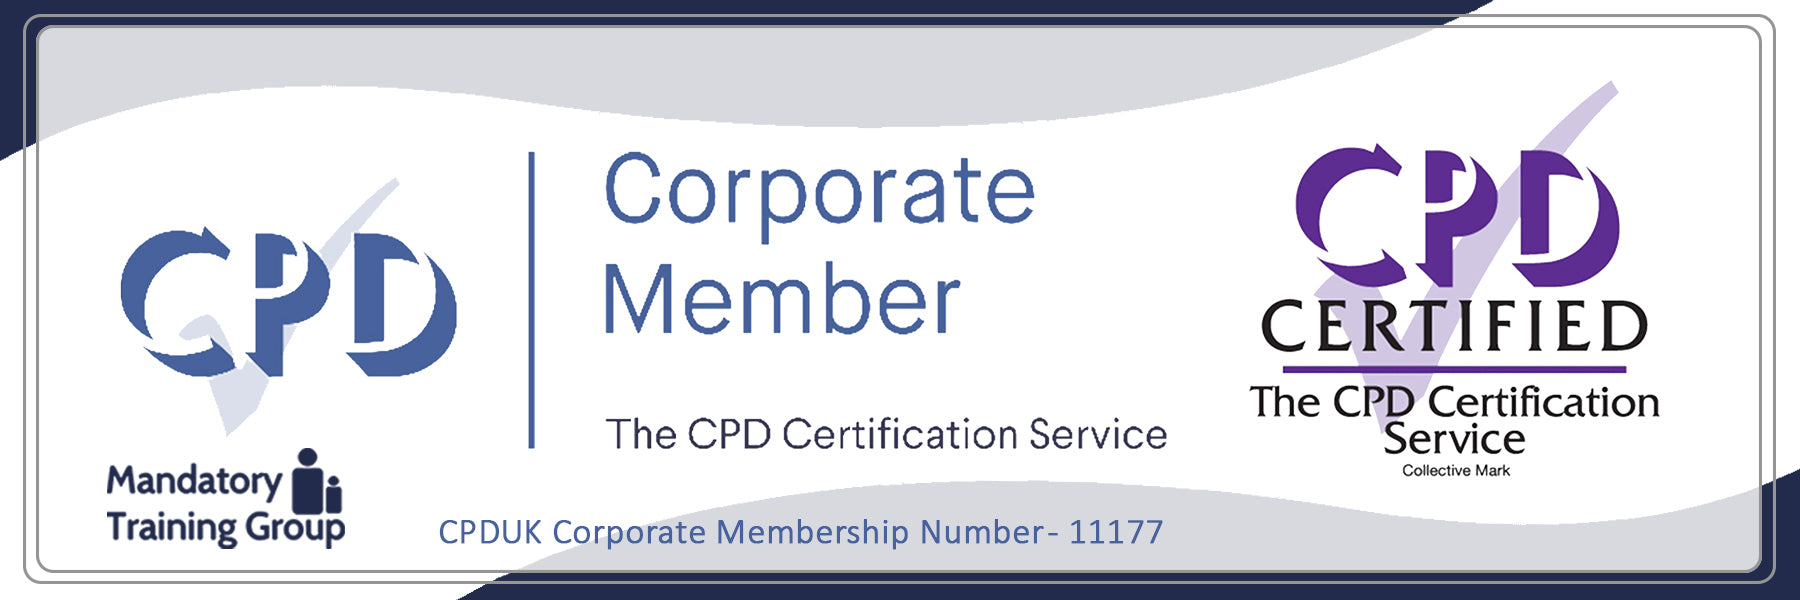 Care Certificate Standard 5 - Train the Trainer Course + Trainer Pack - - Online CPD Course - The Mandatory Training Group UK - --------------------